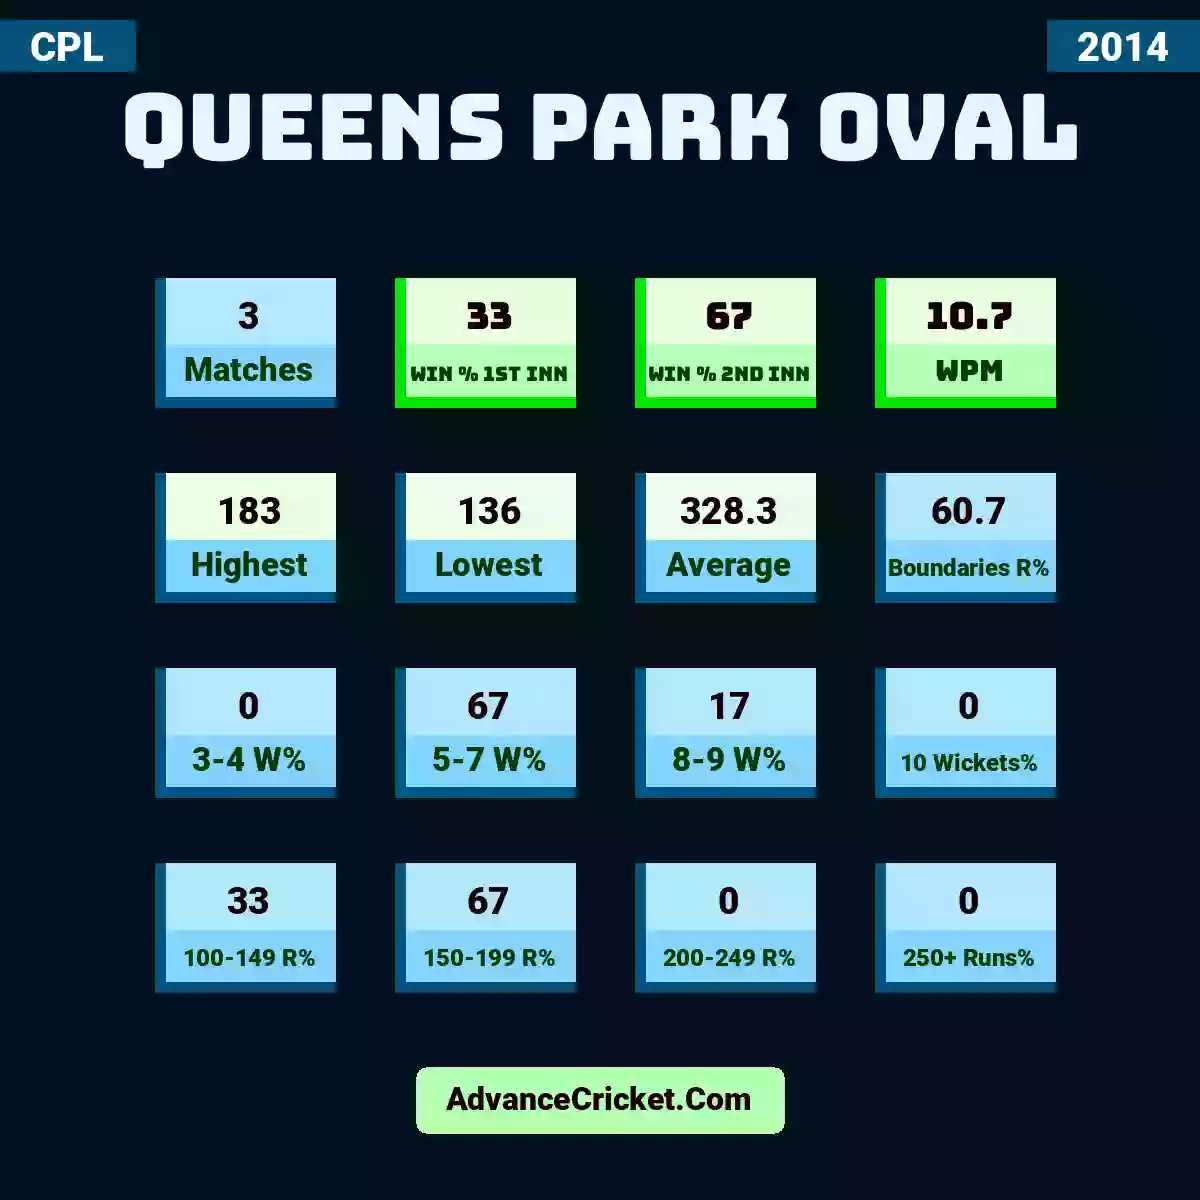 Image showing Queens Park Oval with Matches: 3, Win % 1st Inn: 33, Win % 2nd Inn: 67, WPM: 10.7, Highest: 183, Lowest: 136, Average: 328.3, Boundaries R%: 60.7, 3-4 W%: 0, 5-7 W%: 67, 8-9 W%: 17, 10 Wickets%: 0, 100-149 R%: 33, 150-199 R%: 67, 200-249 R%: 0, 250+ Runs%: 0.